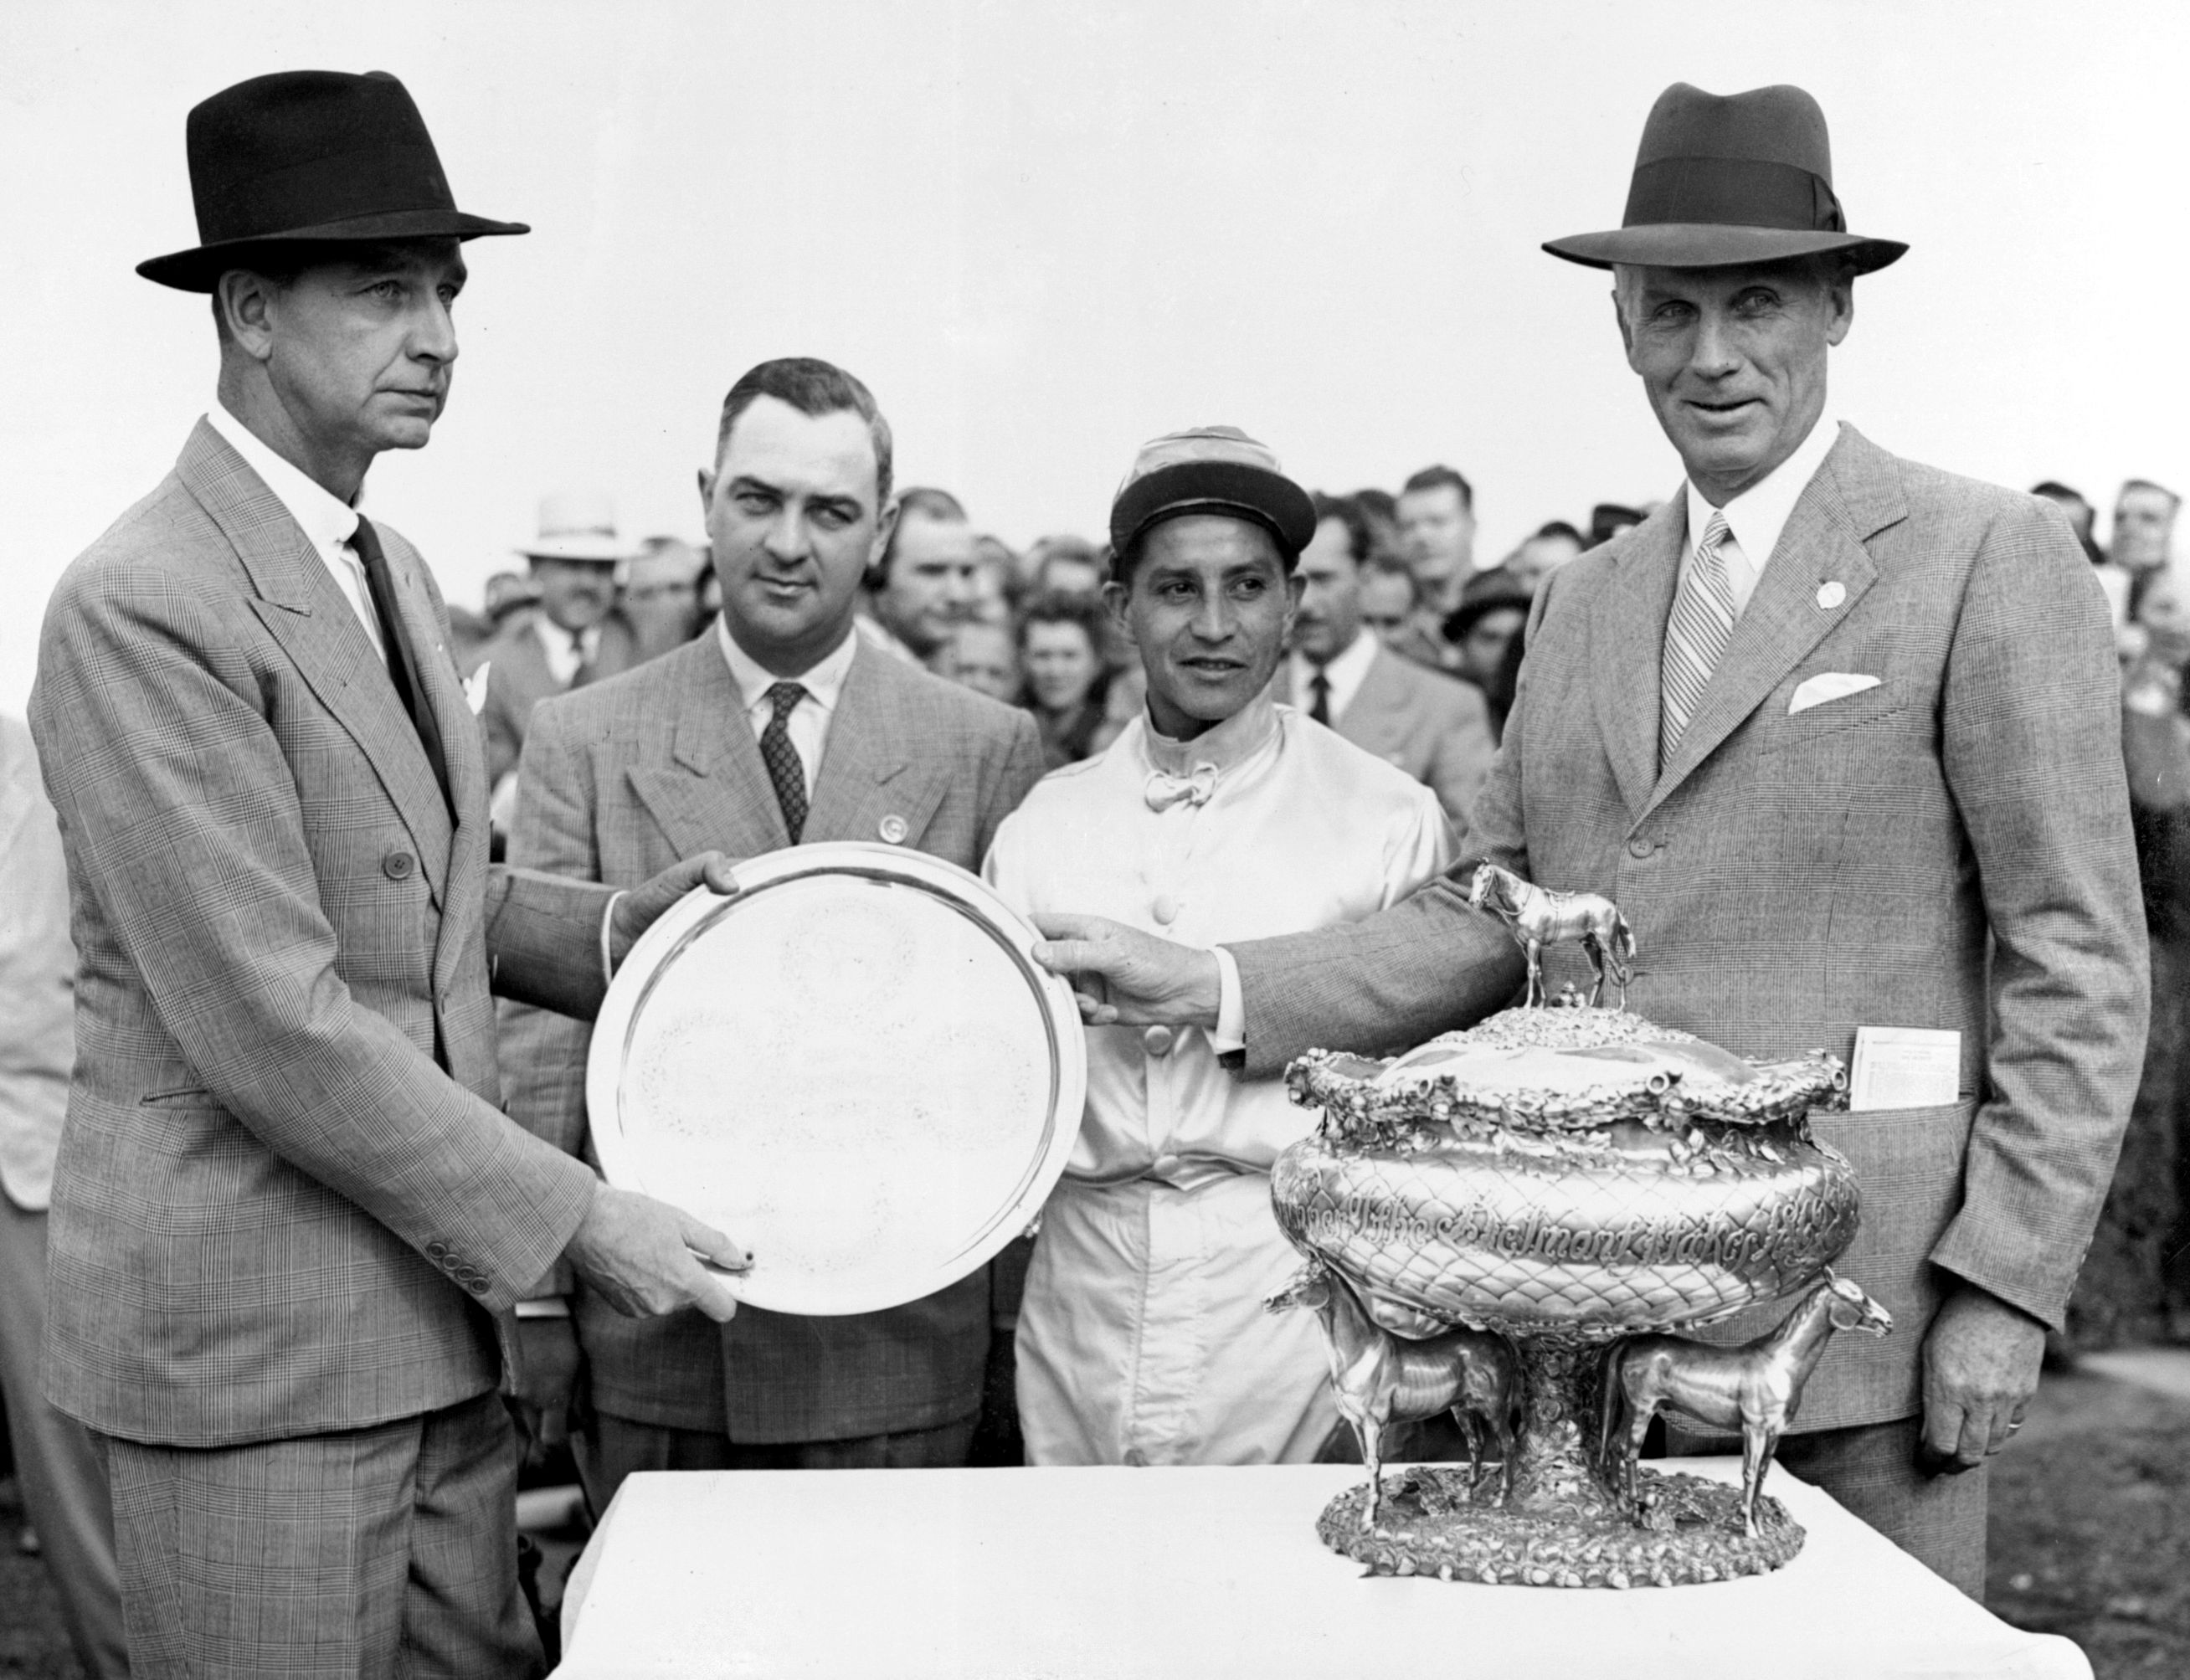 From left, C. V. Whitney, Syl Veitch, Ruperto Donoso, and George D. Widener, 1947 Belmont Stakes presentation (Keeneland Library Morgan Collection)